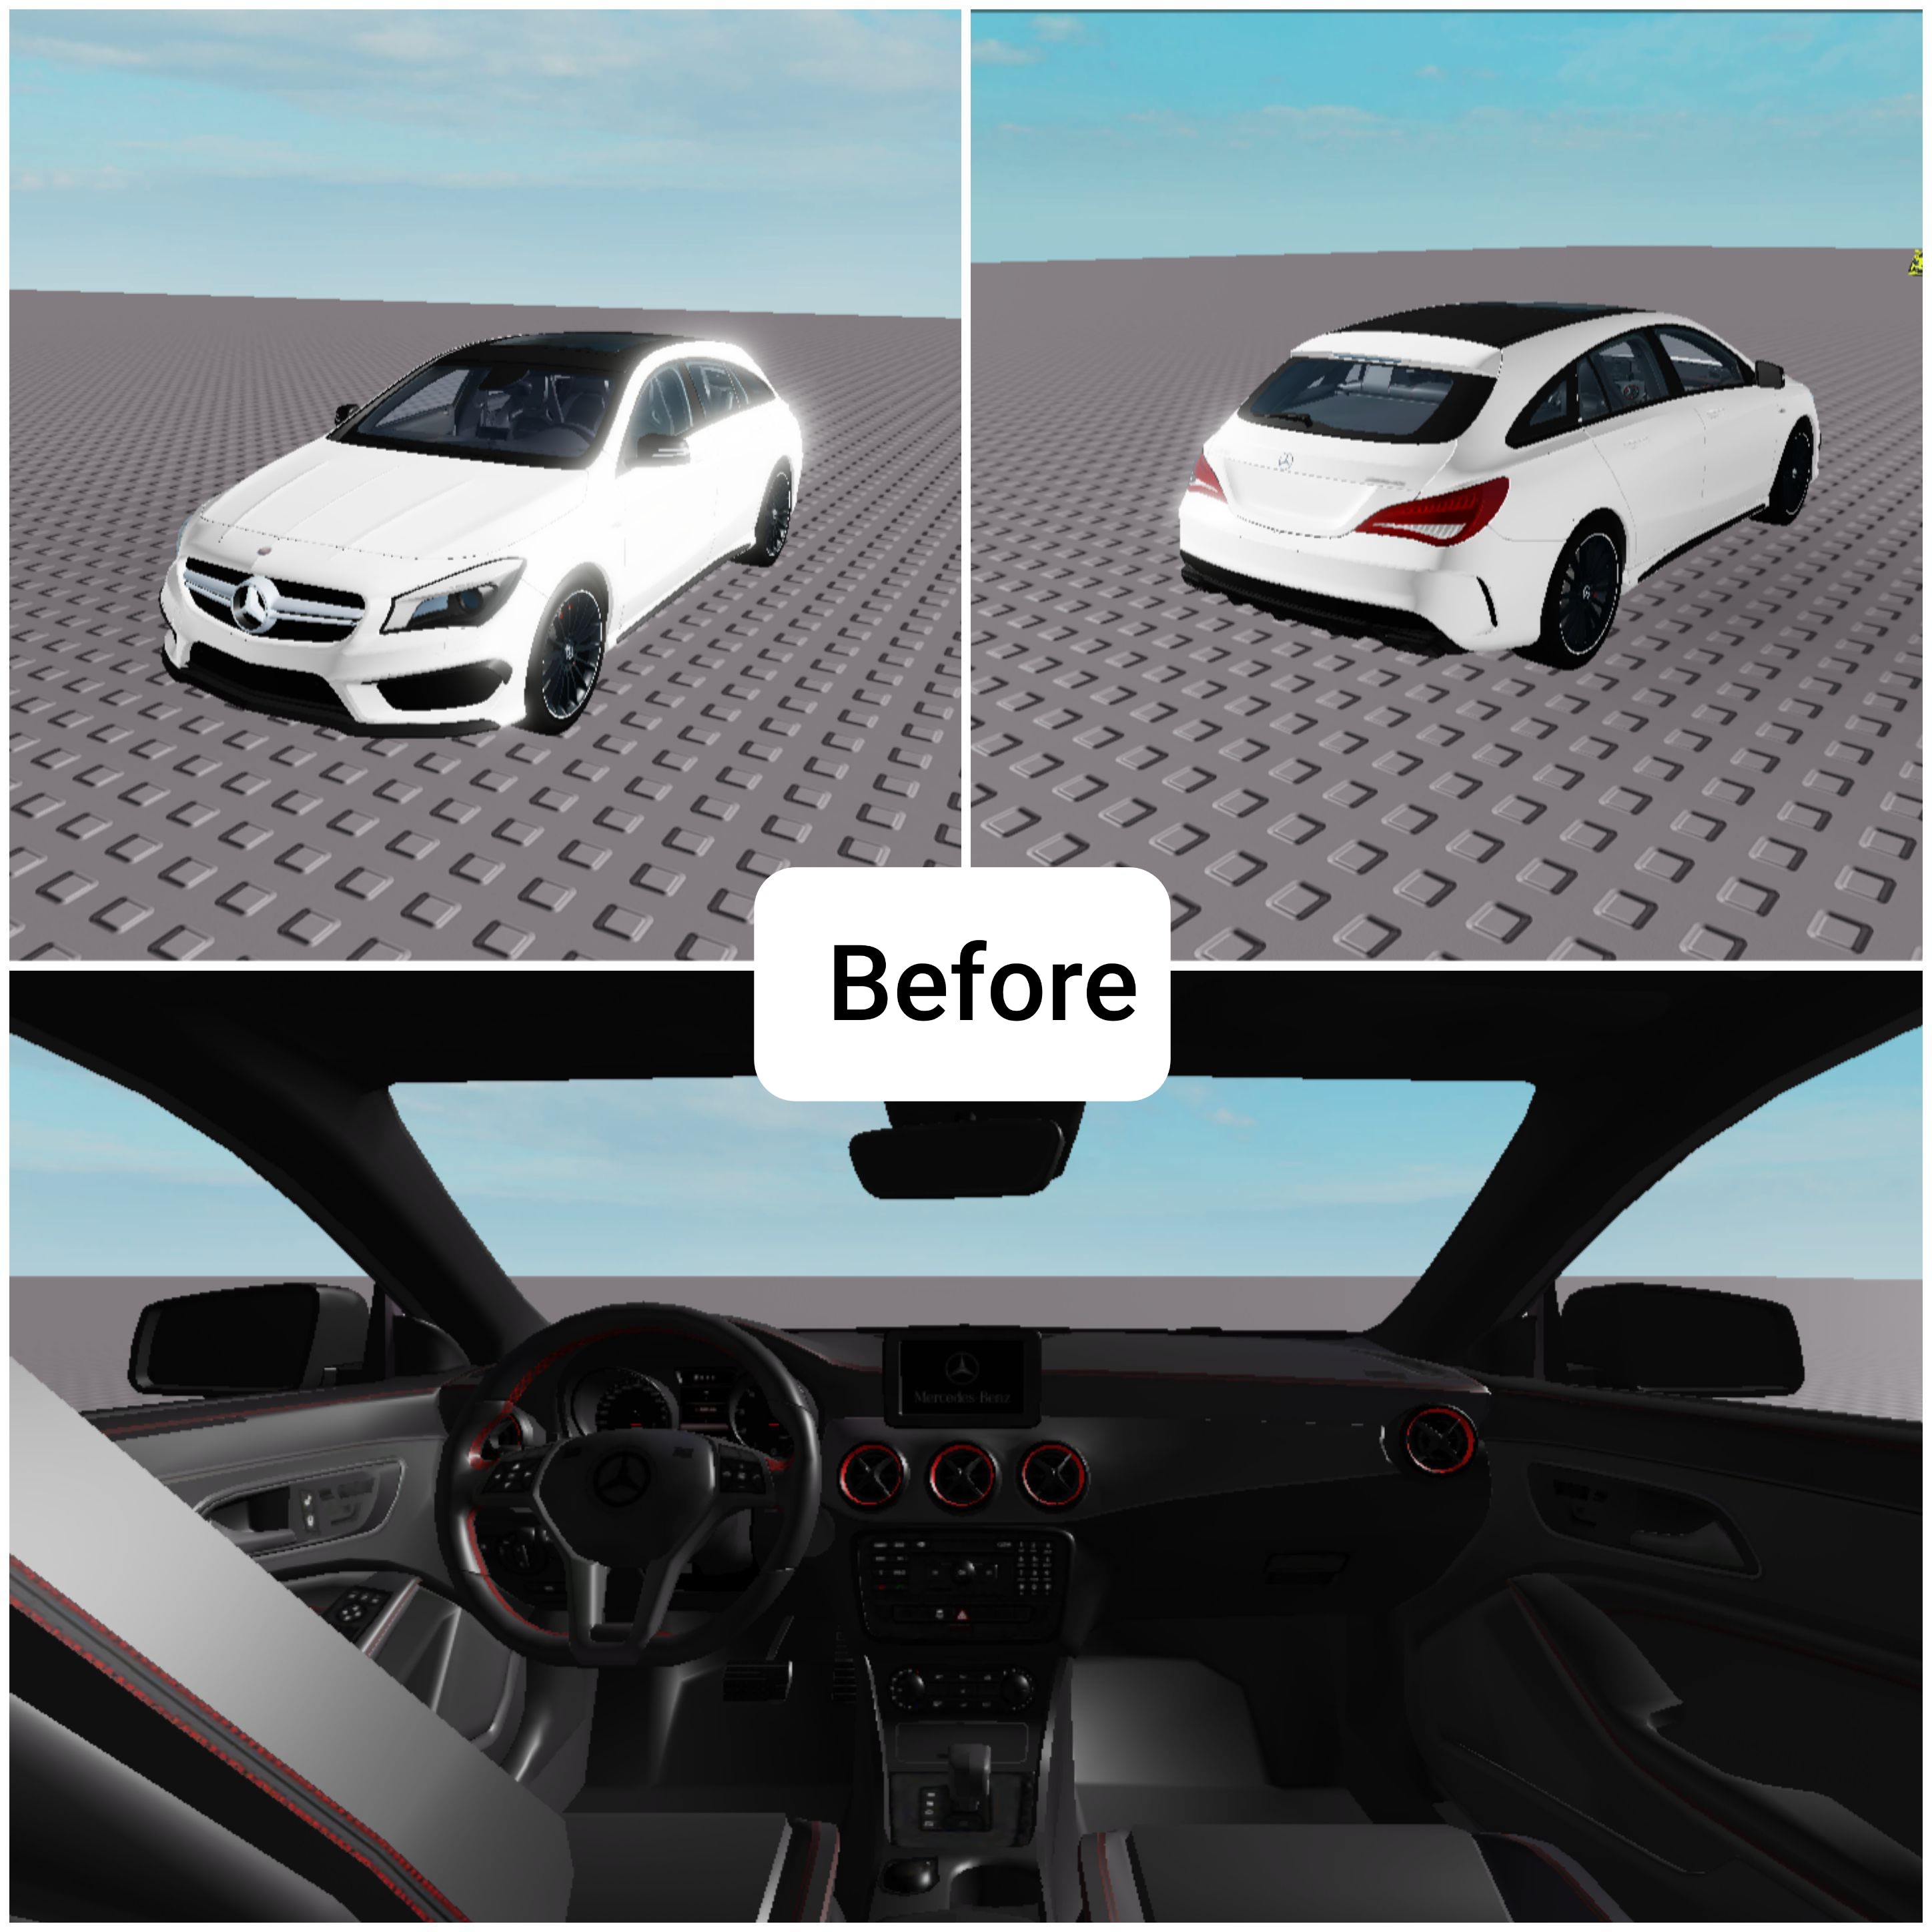 Modify Your Car Model In Roblox Studio With The Specifications You Desire By Sebastian Yeong Fiverr - how to make your own model in roblox studio